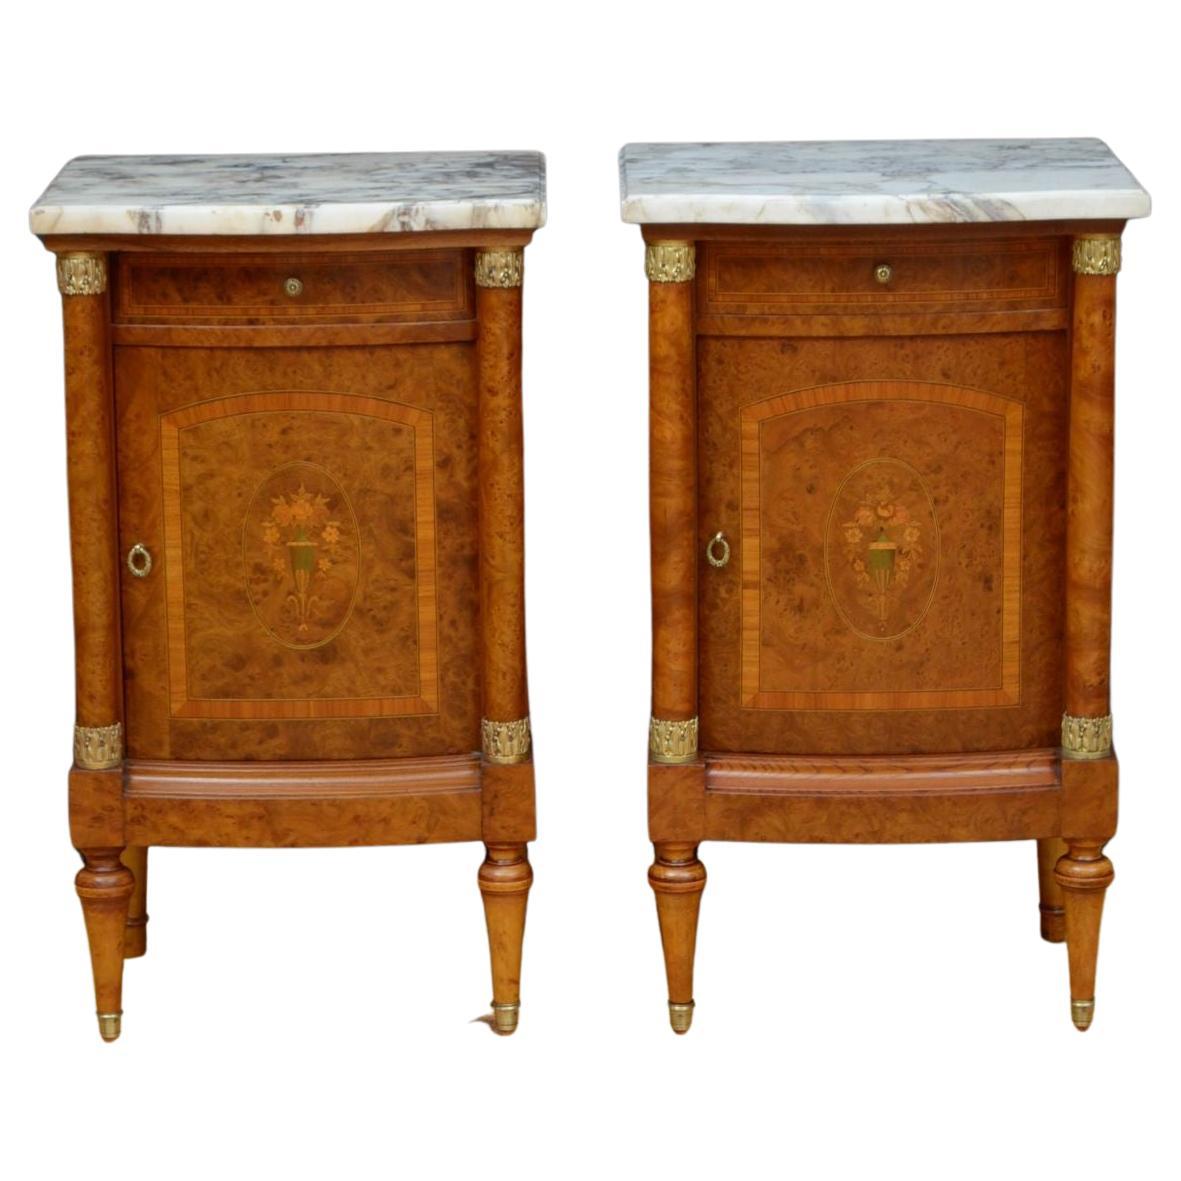 Pair of Turn of The Century Bedside Cabinets For Sale